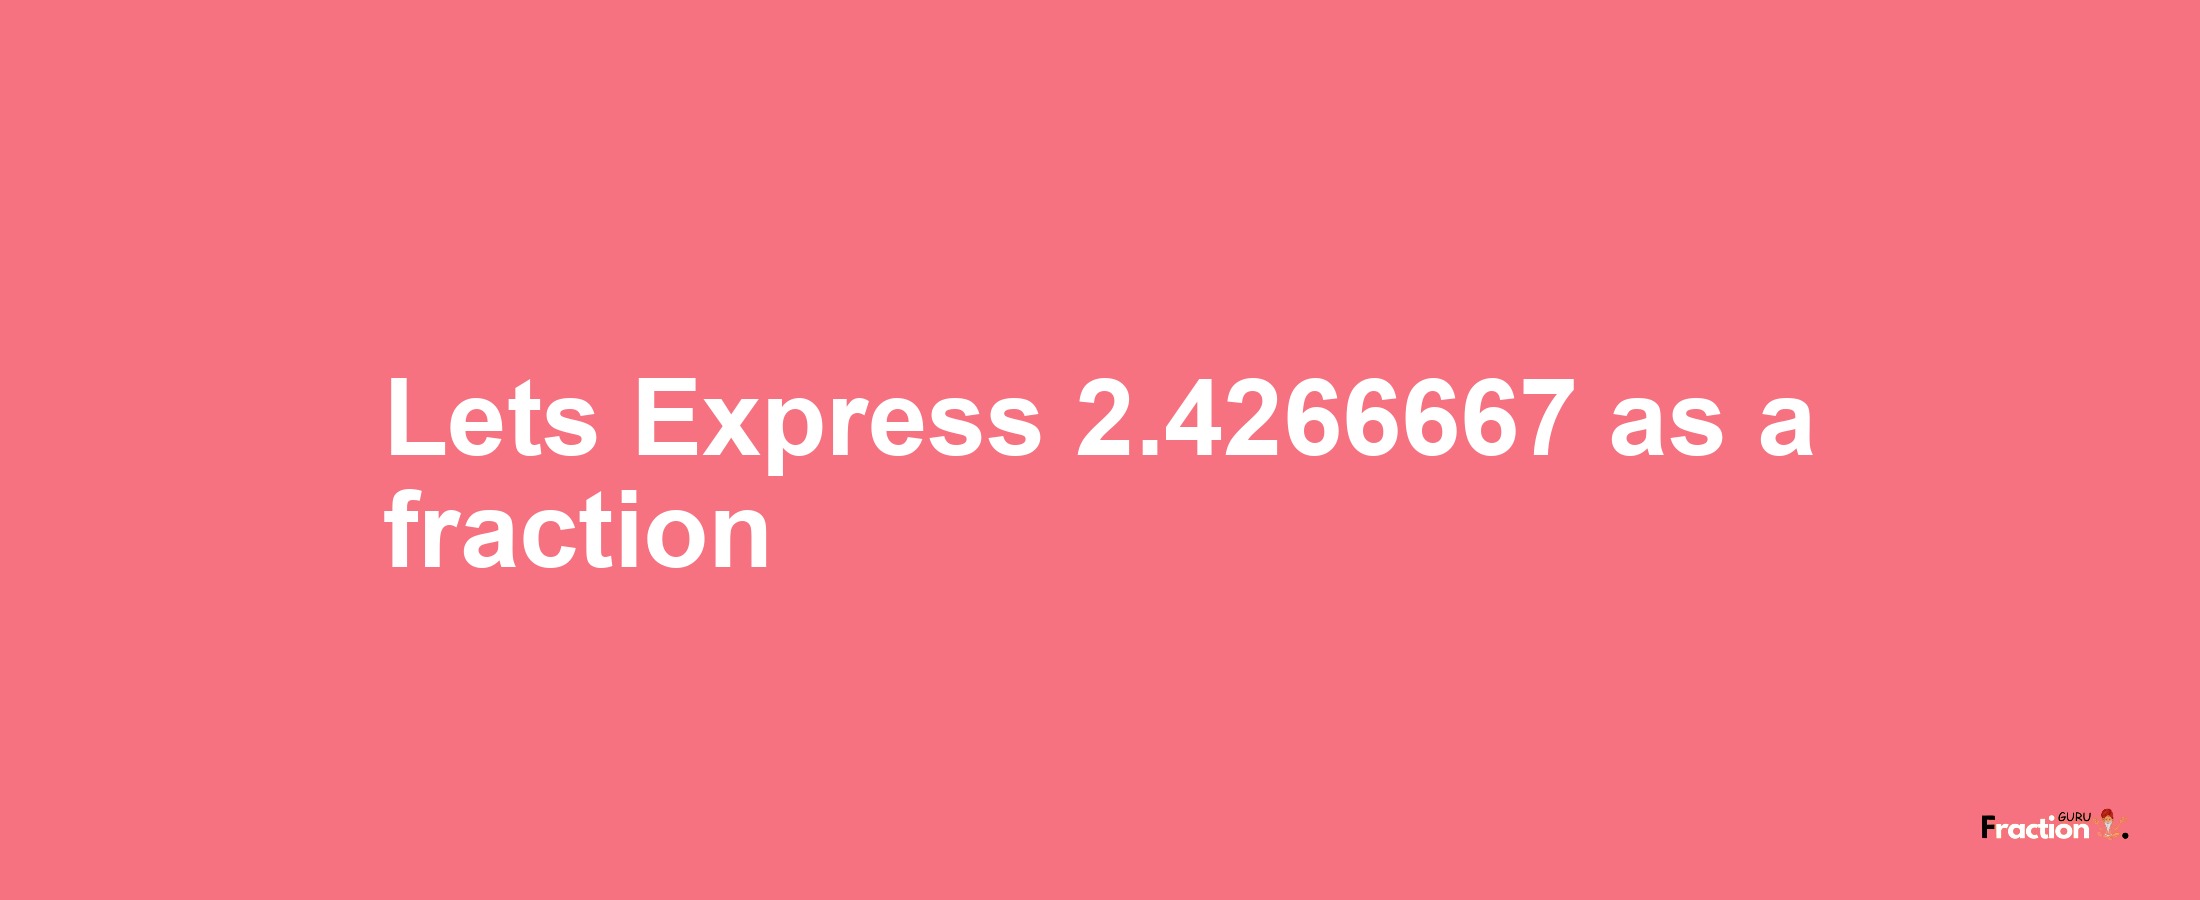 Lets Express 2.4266667 as afraction